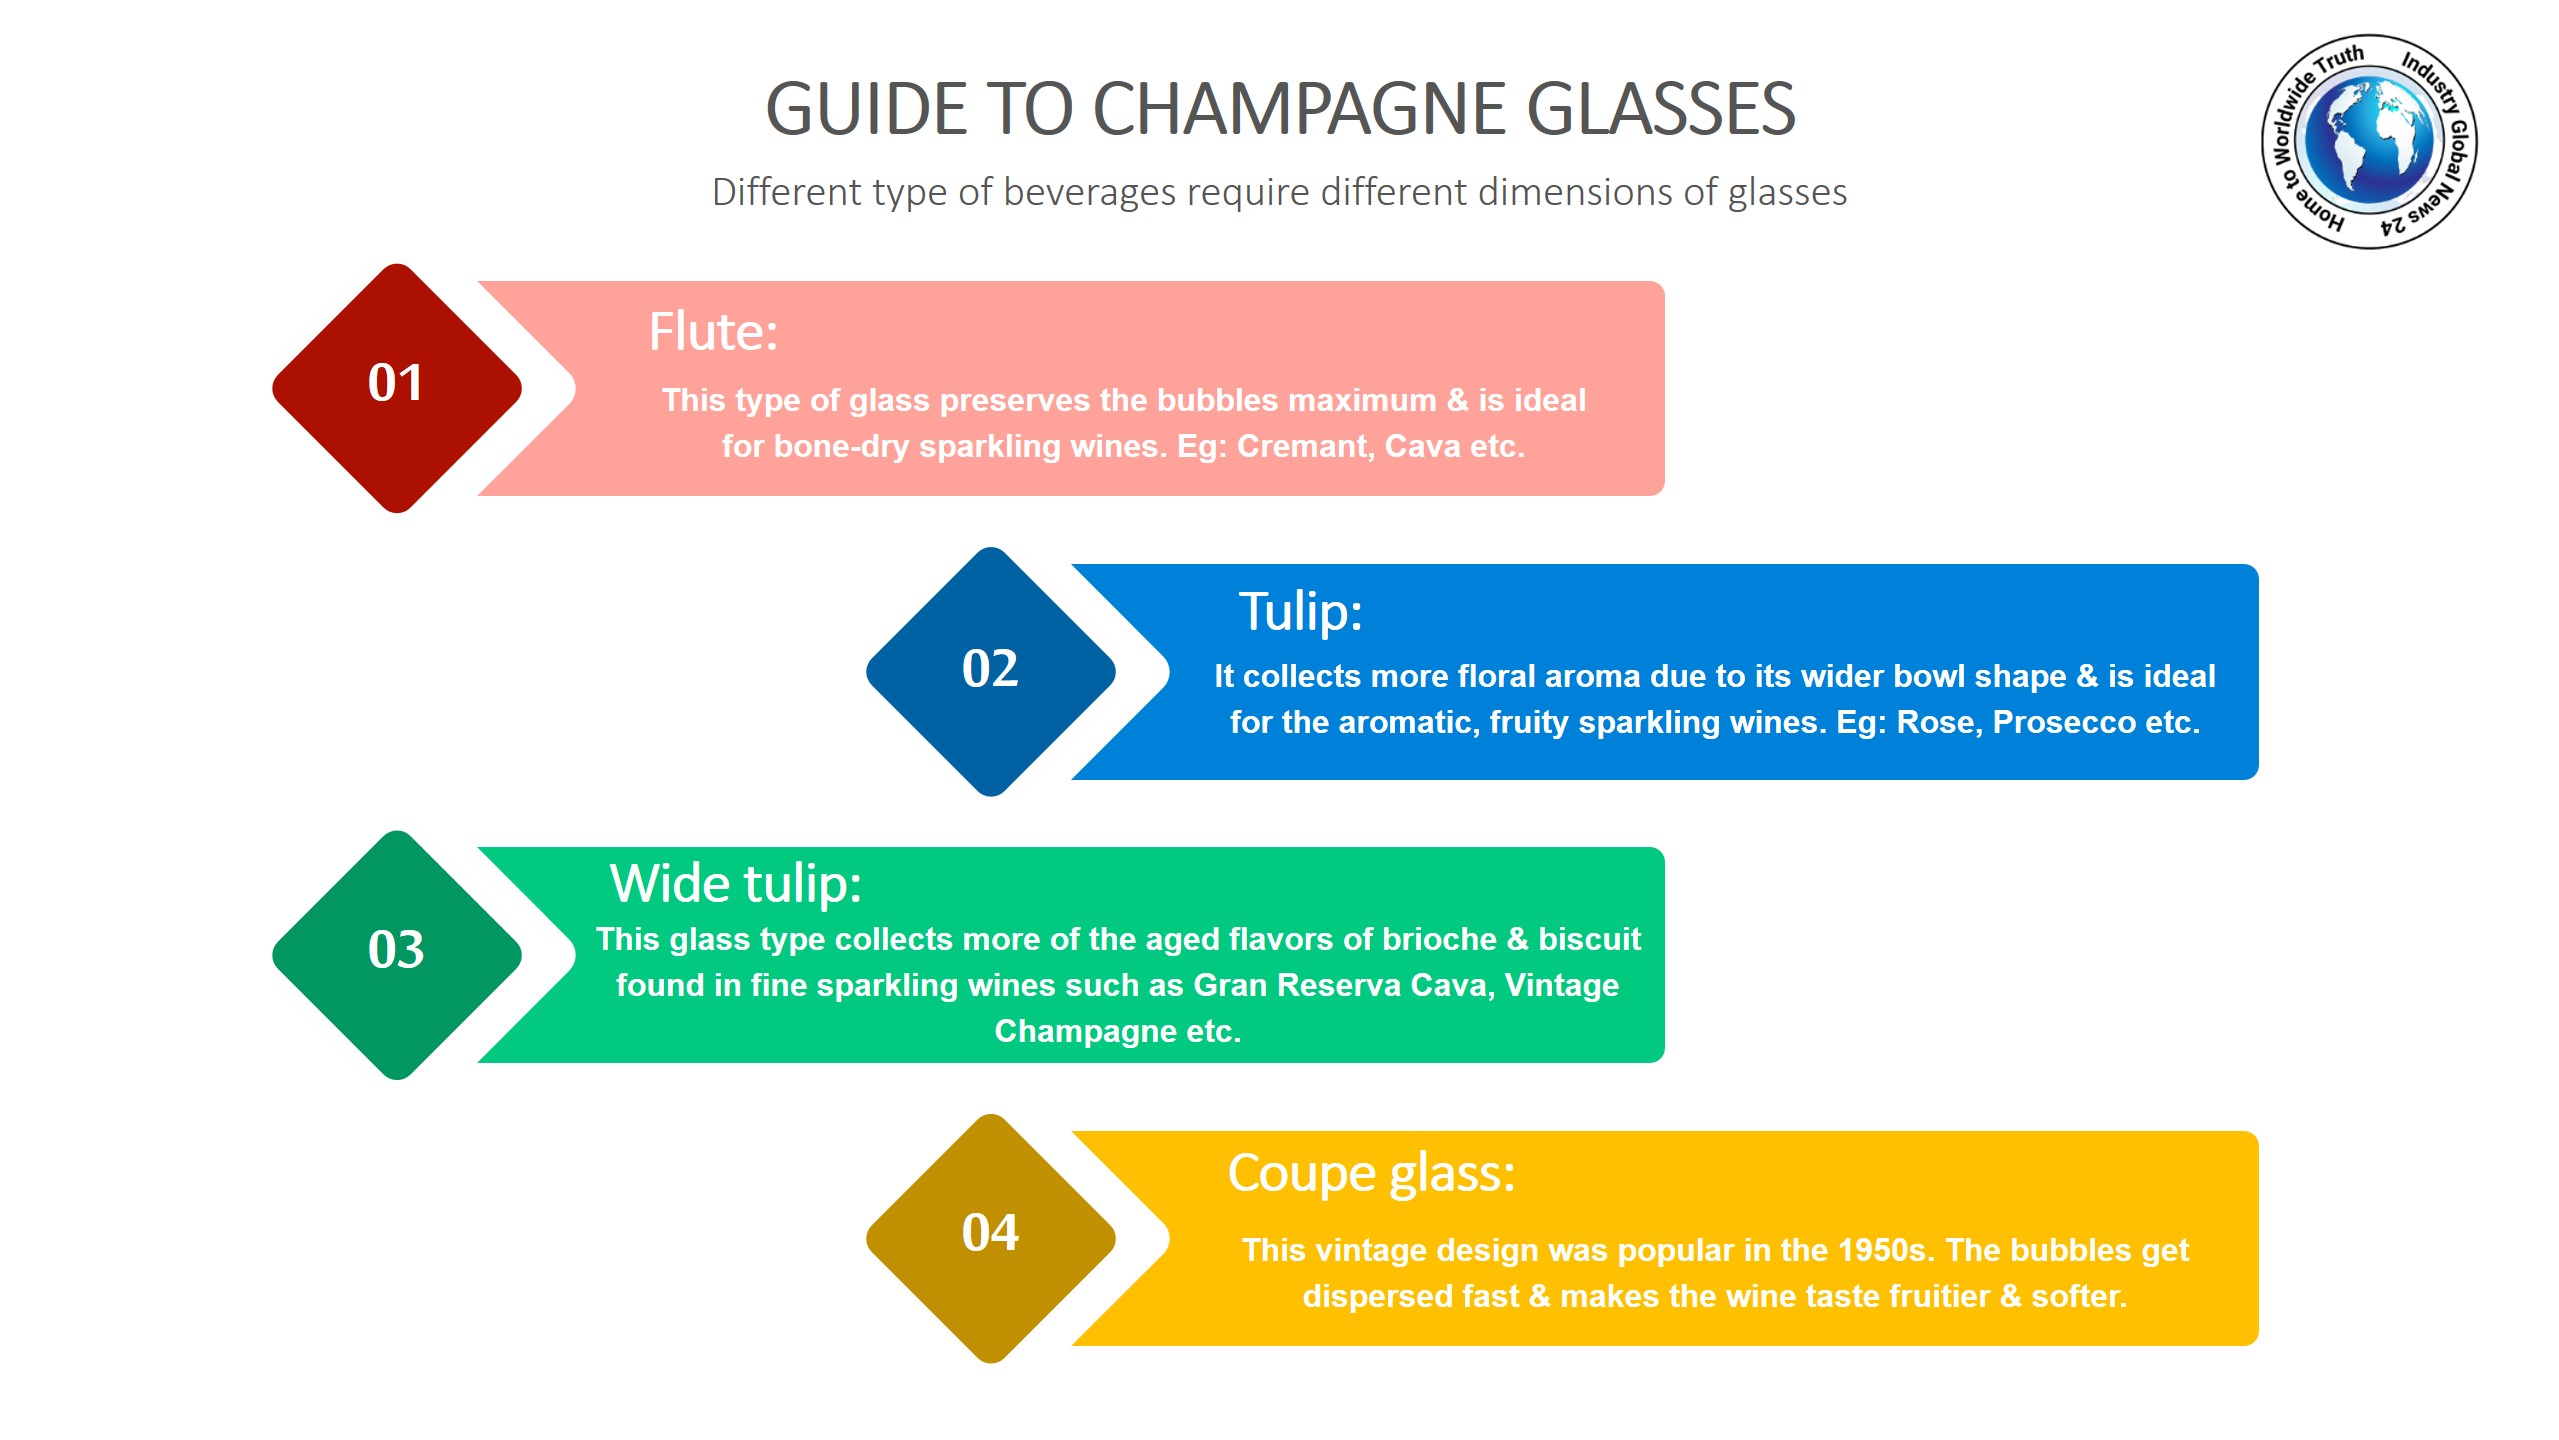 Guide to champagne glasses